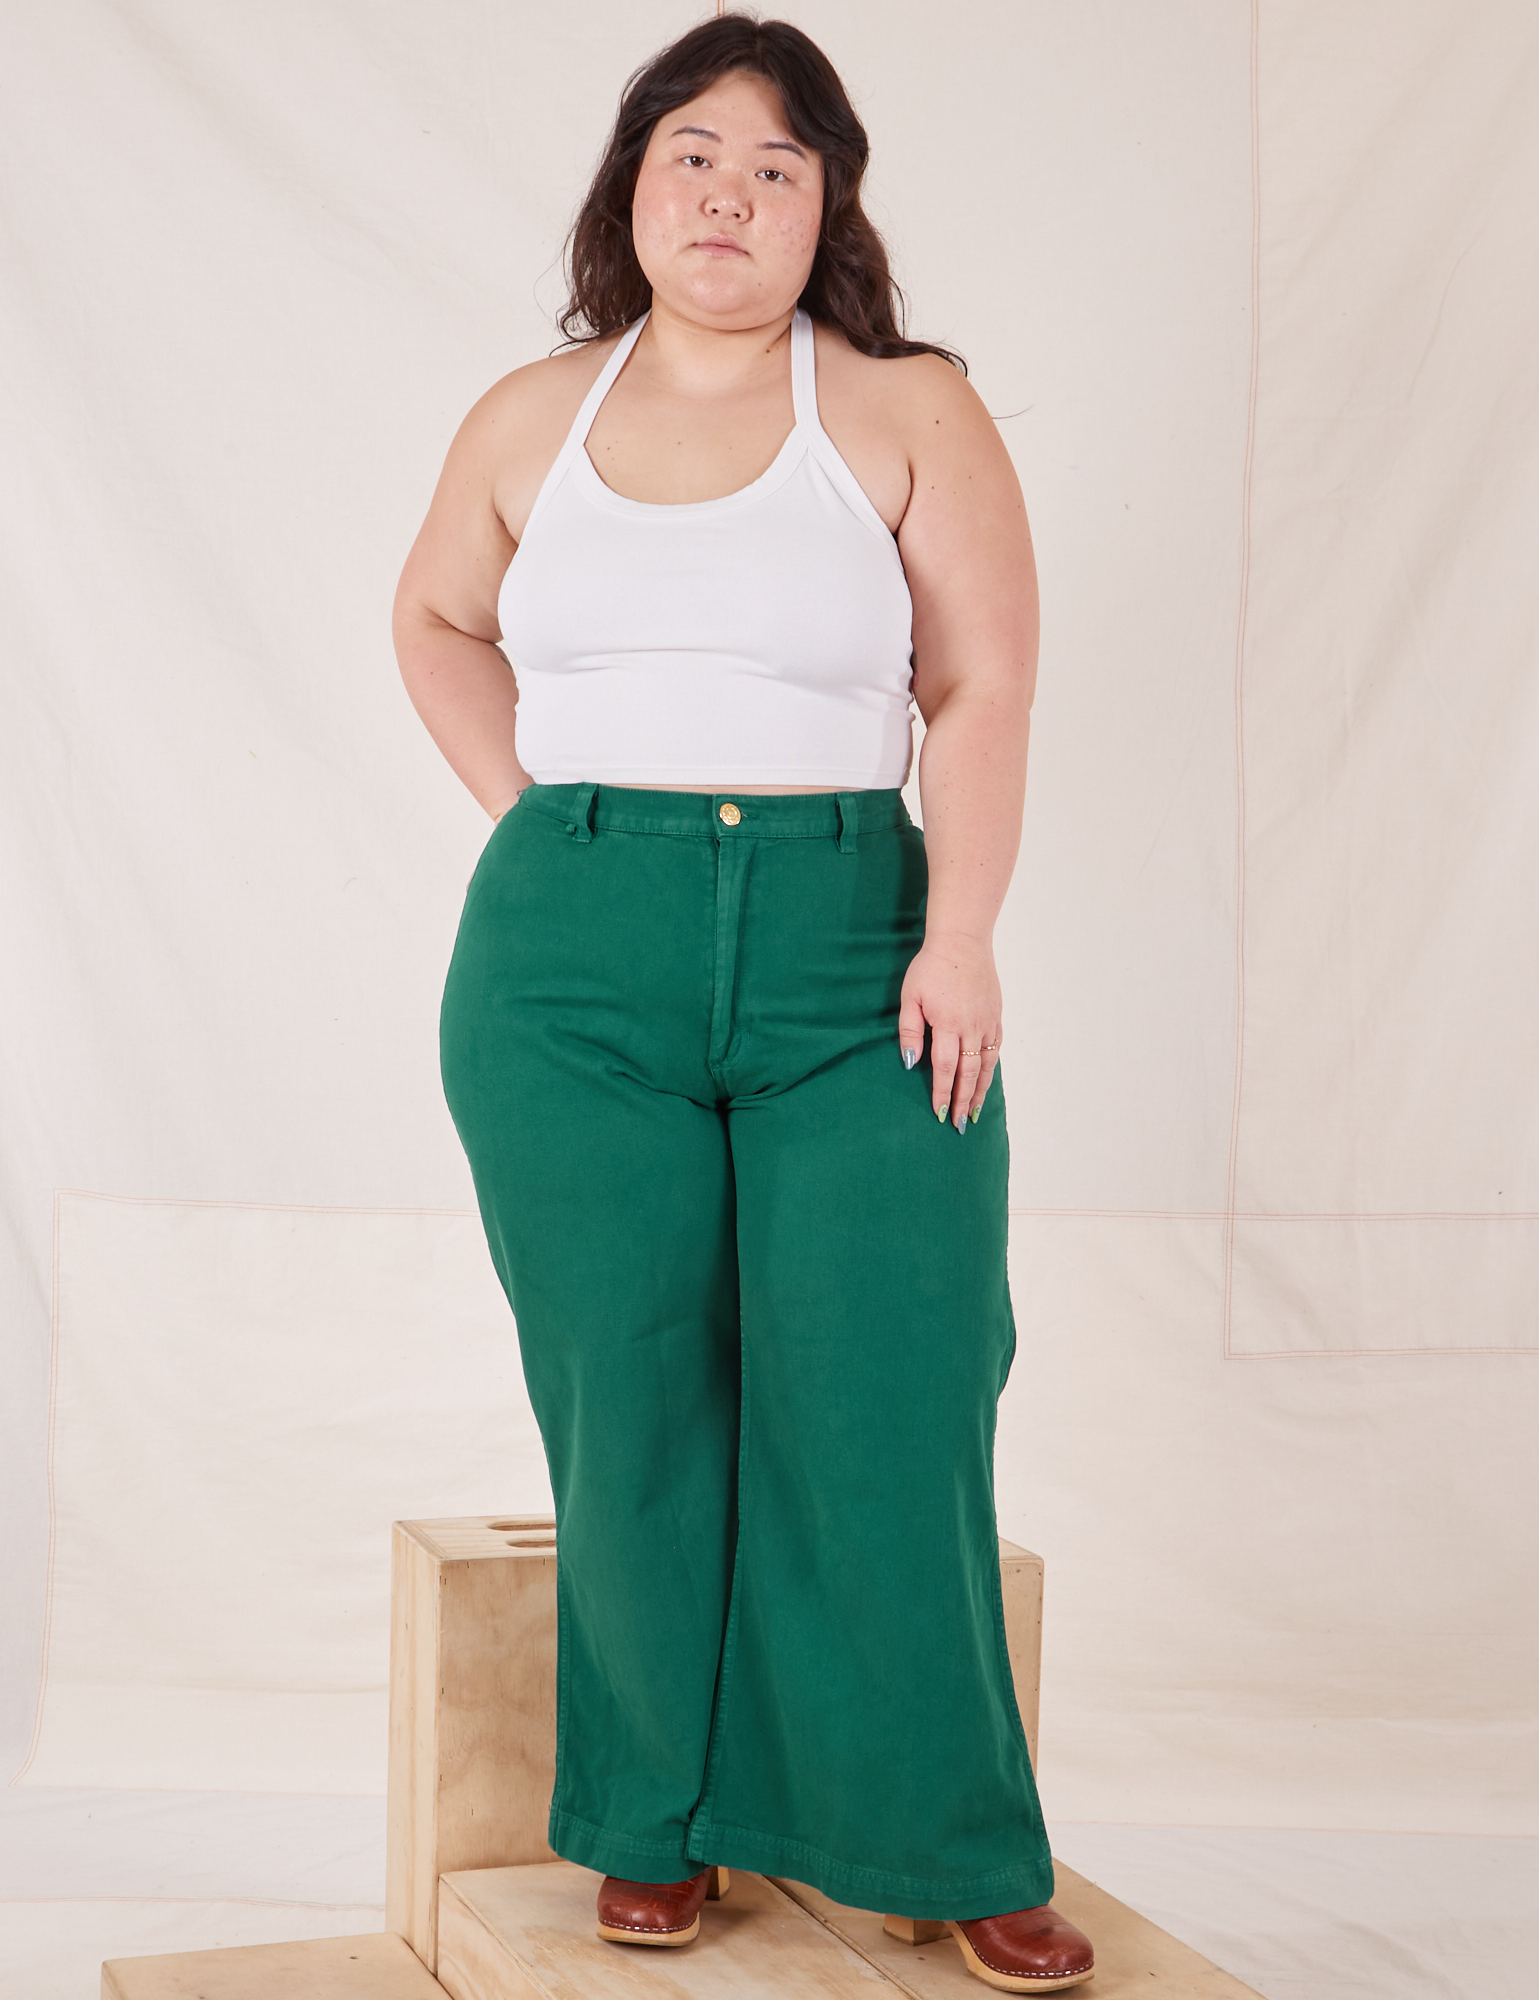 Ashley is 5&#39;7&quot; and wearing 1XL Bell Bottoms in Hunter Green paired with a Halter Top in vintage tee off-white